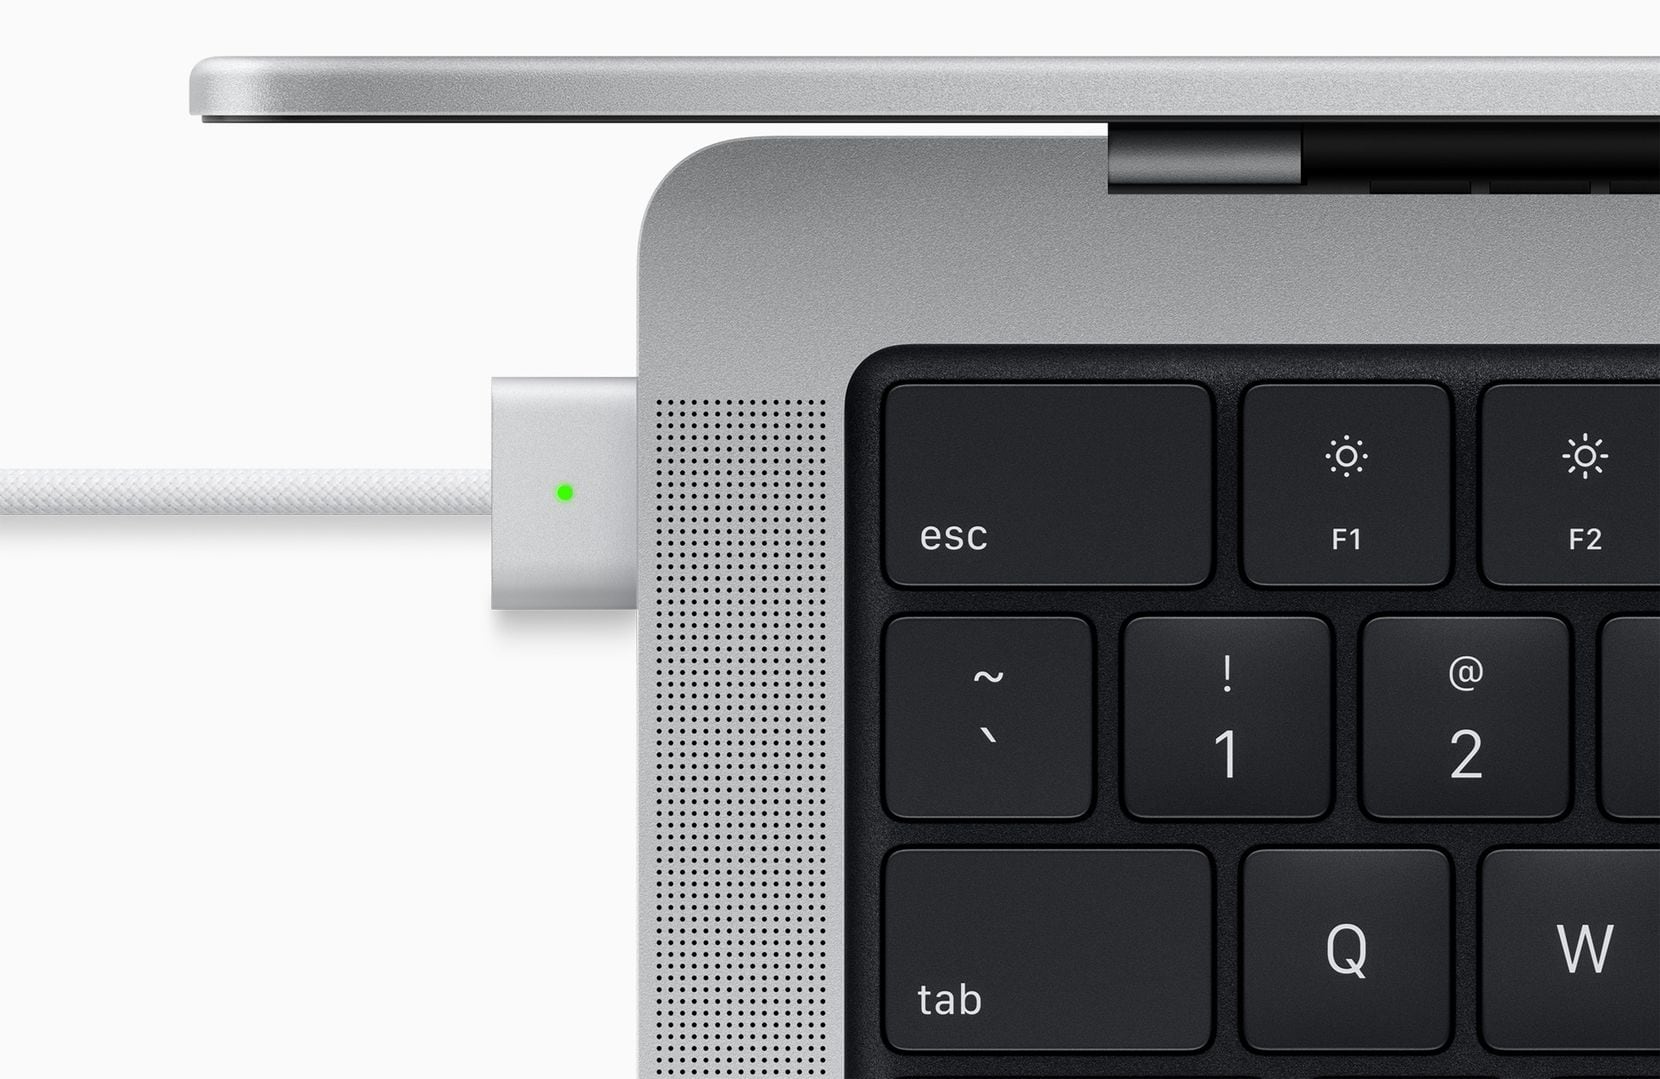 The 2021 MacBook Pros mark the return of MagSafe power cables.